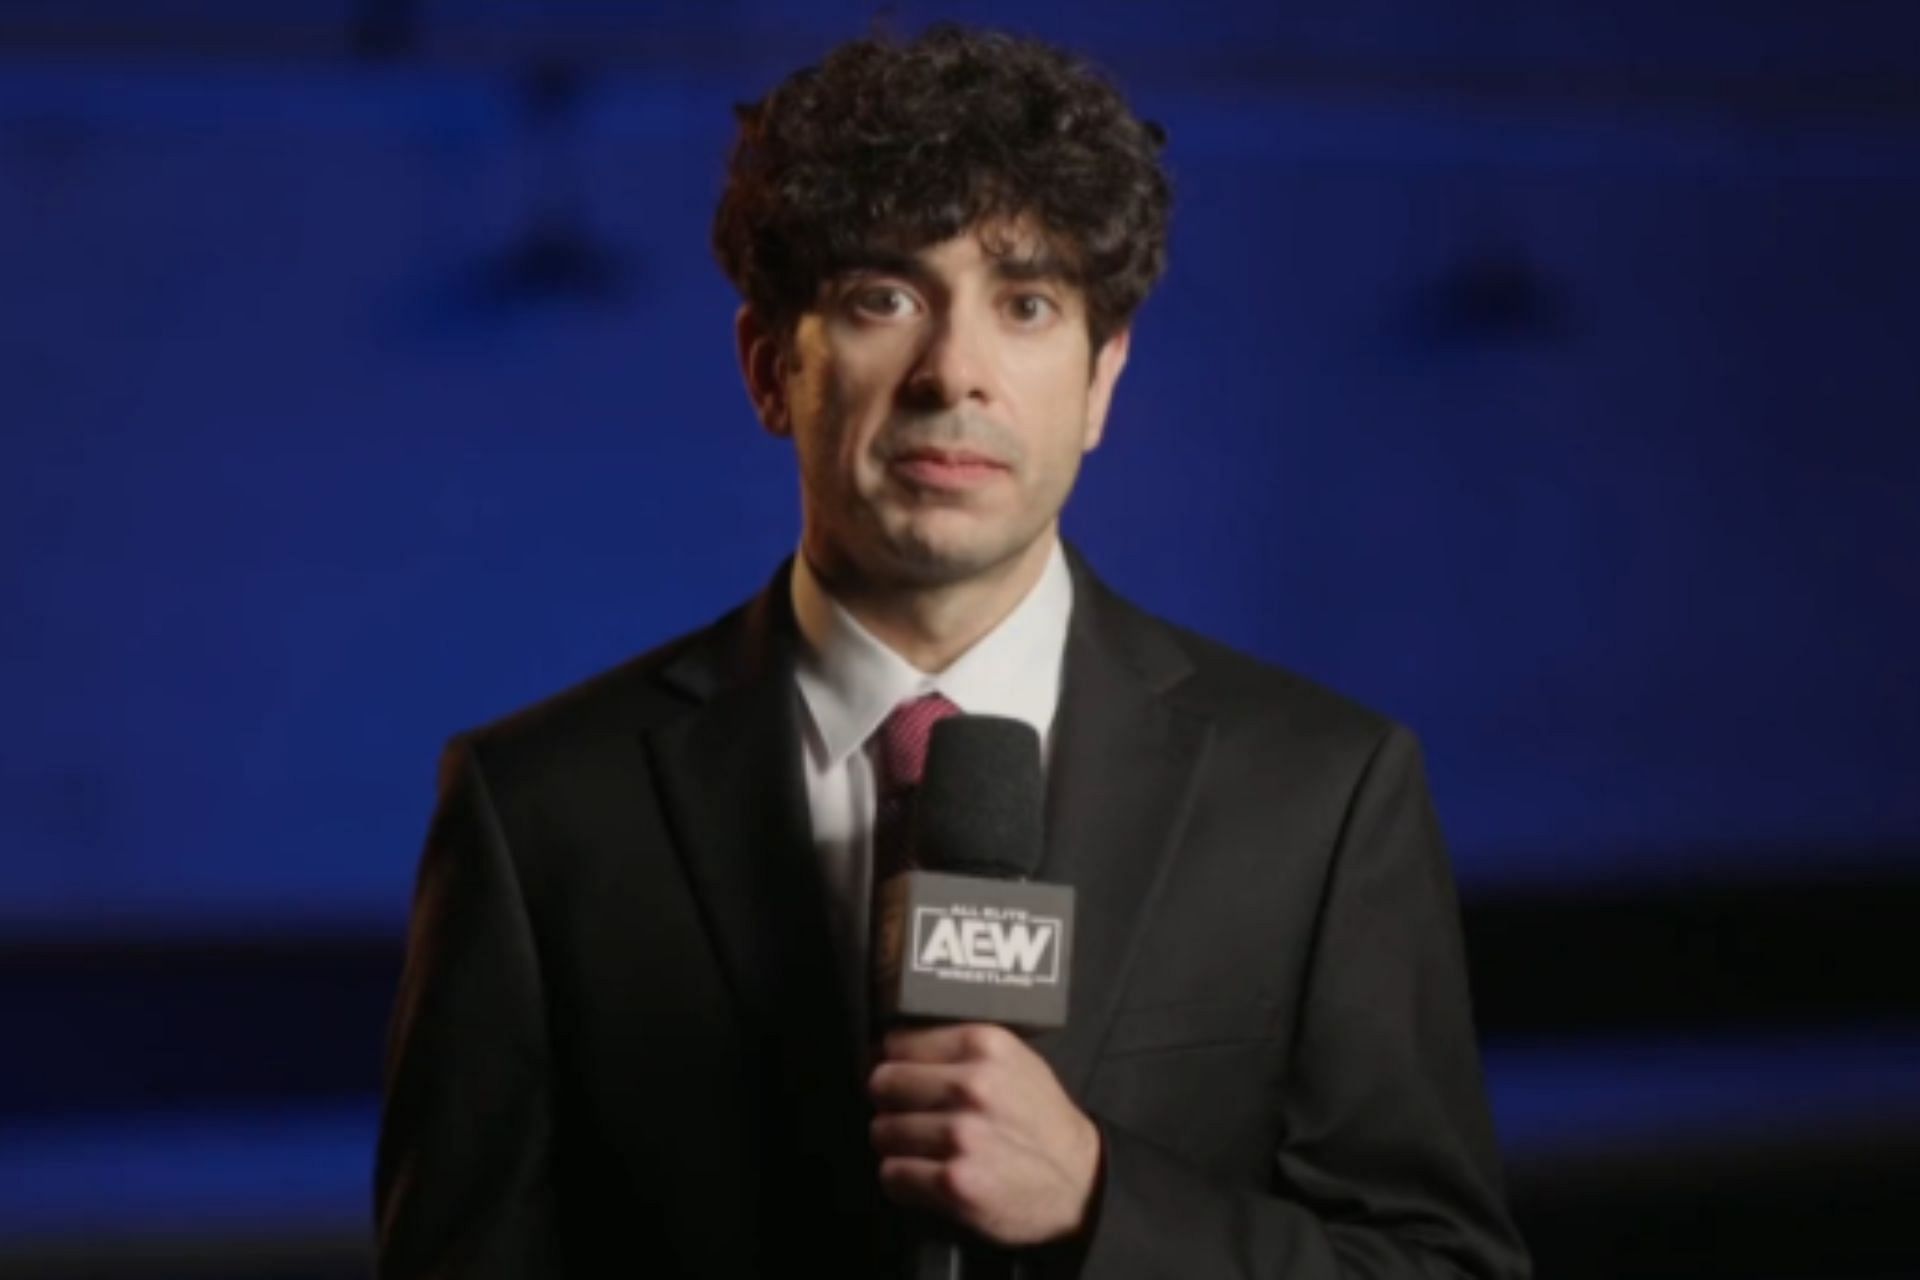 Tony Khan is taking heat for the exit of an AEW talent